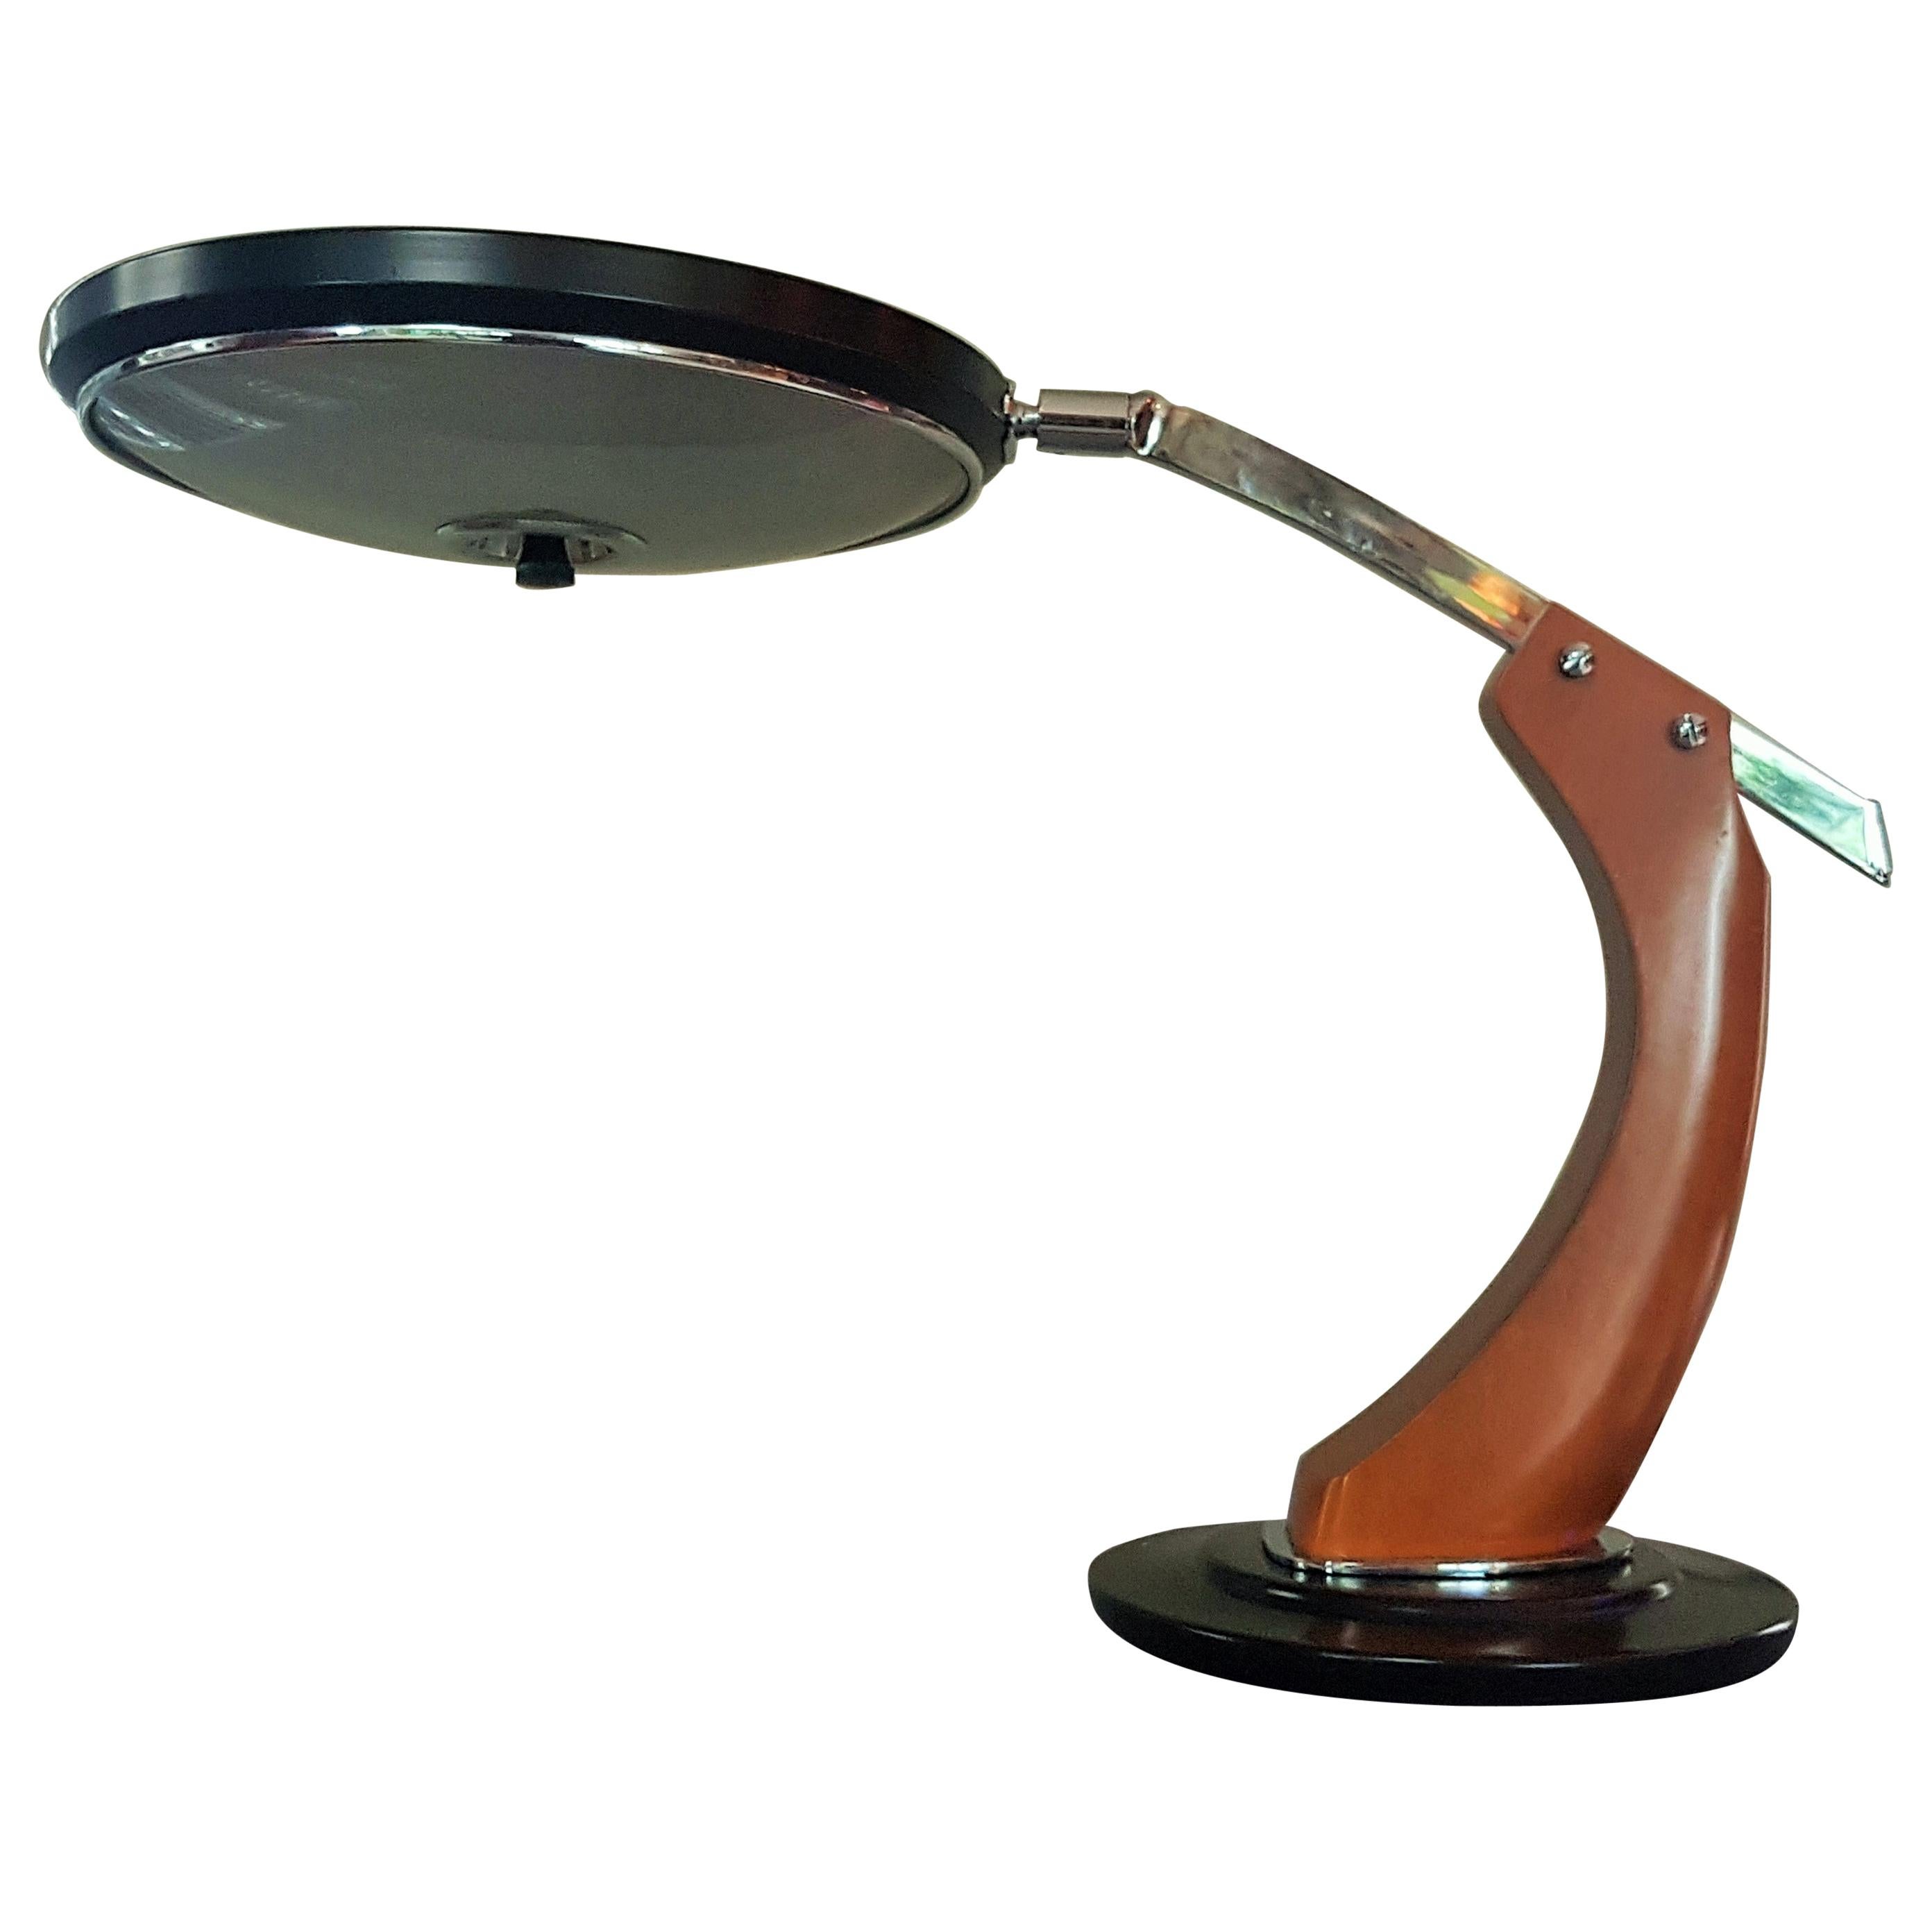 Midcentury Desk Table Lamp by Fase, Spain, 1960s